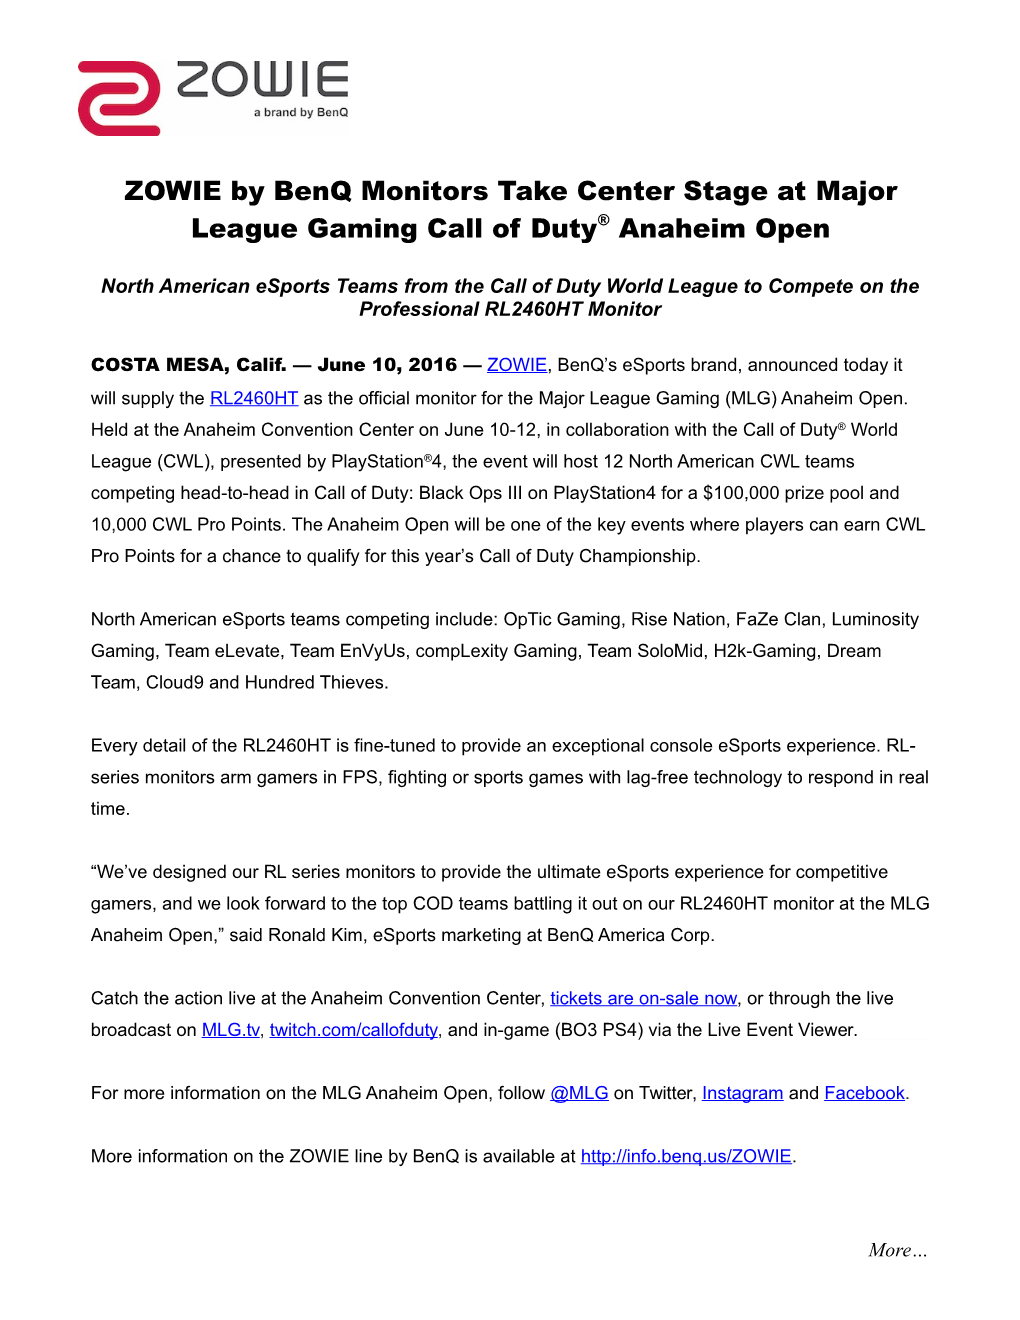 ZOWIE by Benq Monitors Take Center Stage at Major League Gaming Call of Duty Anaheim Open